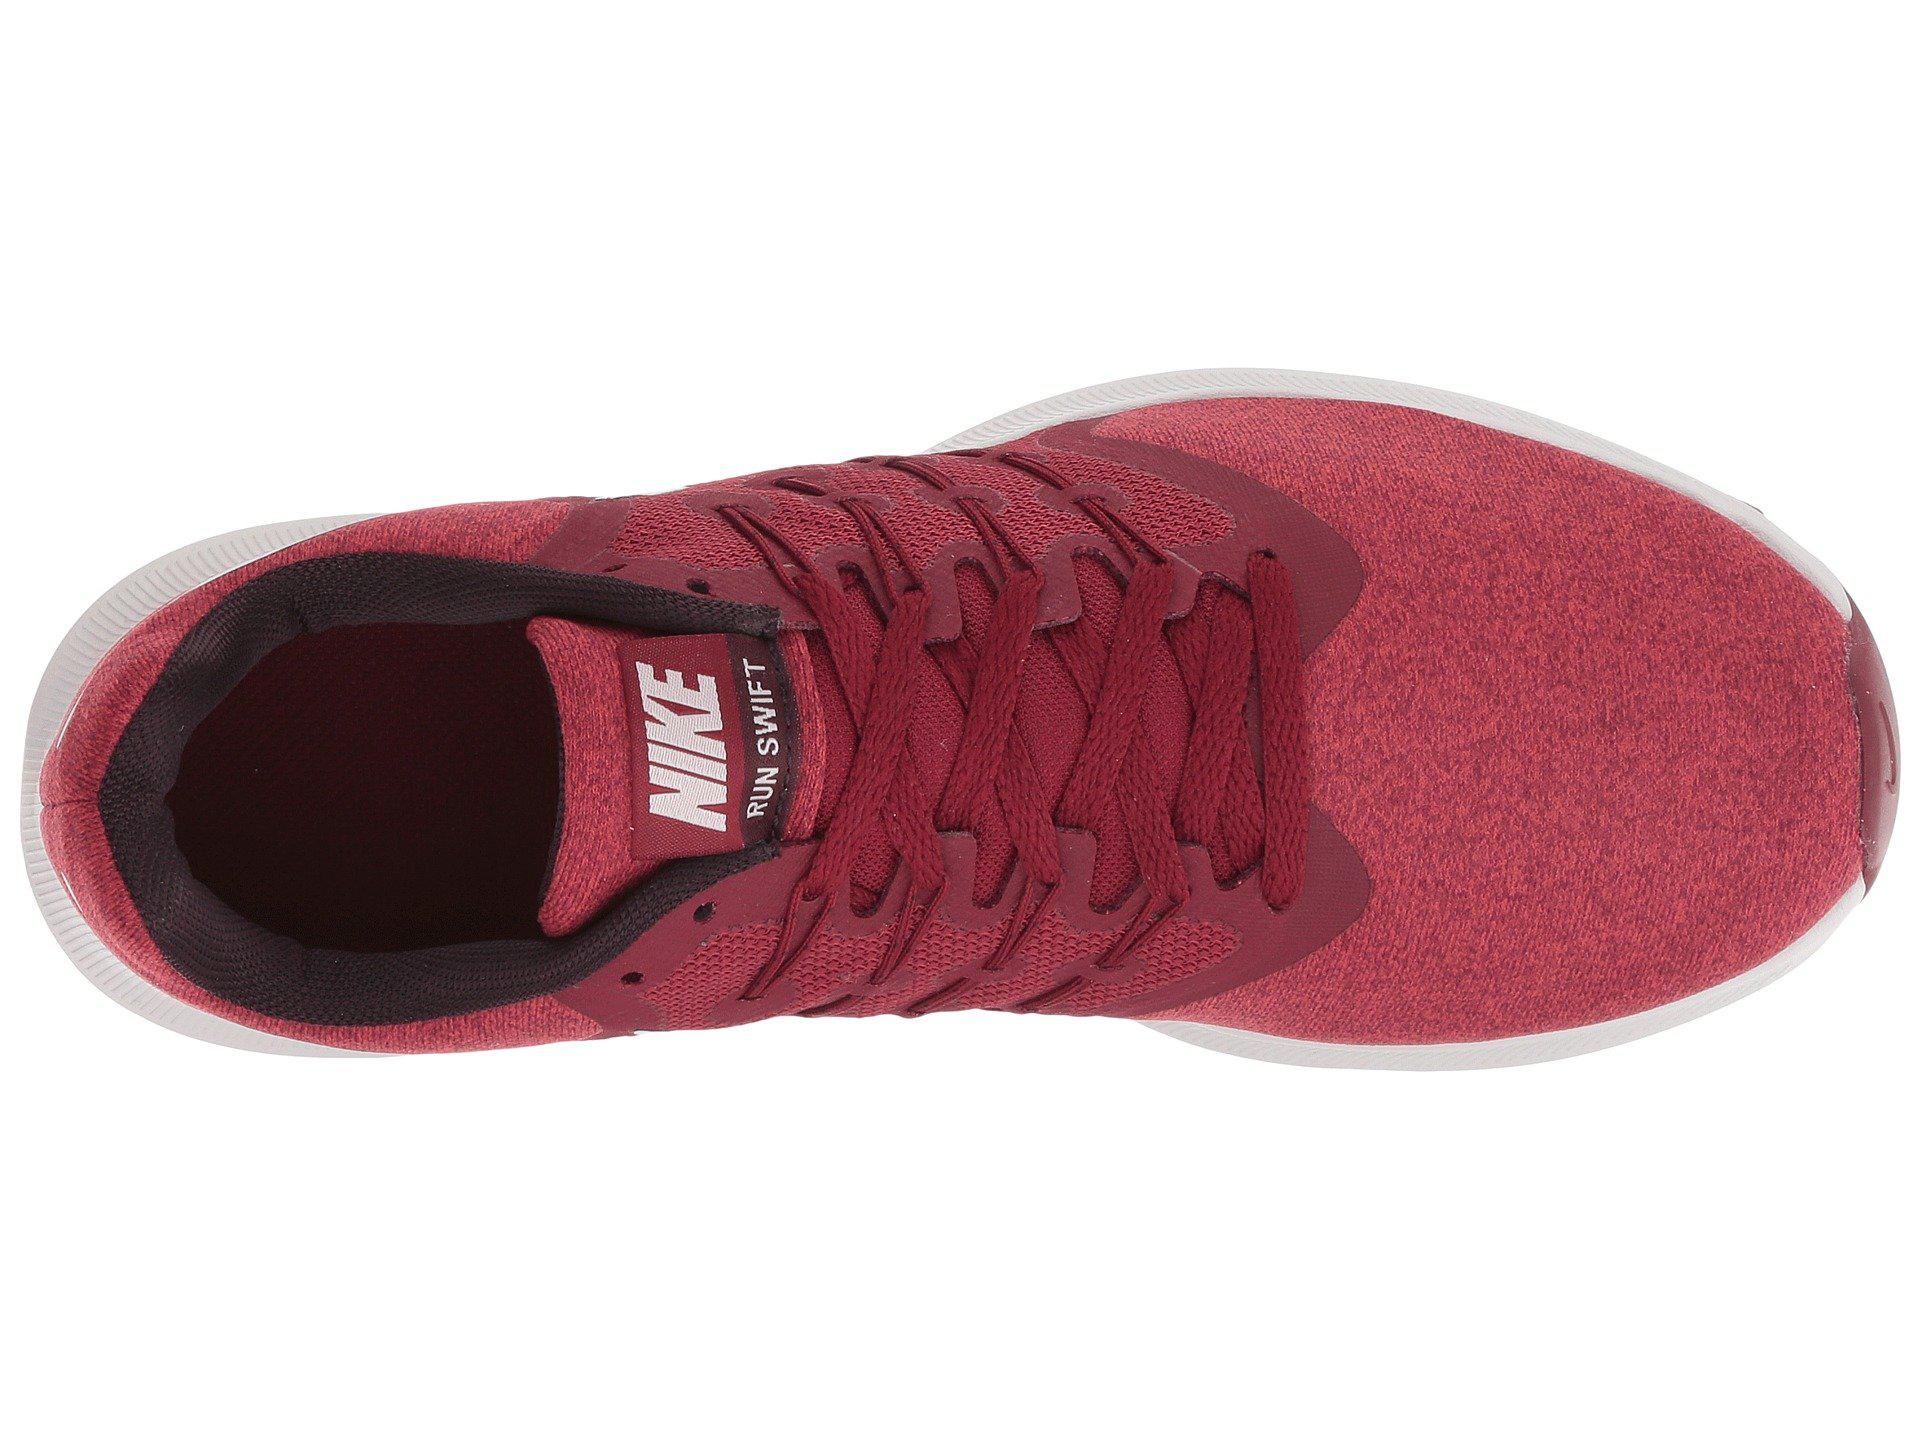 Nike Synthetic Swift Running Shoe in Red for Men - Lyst